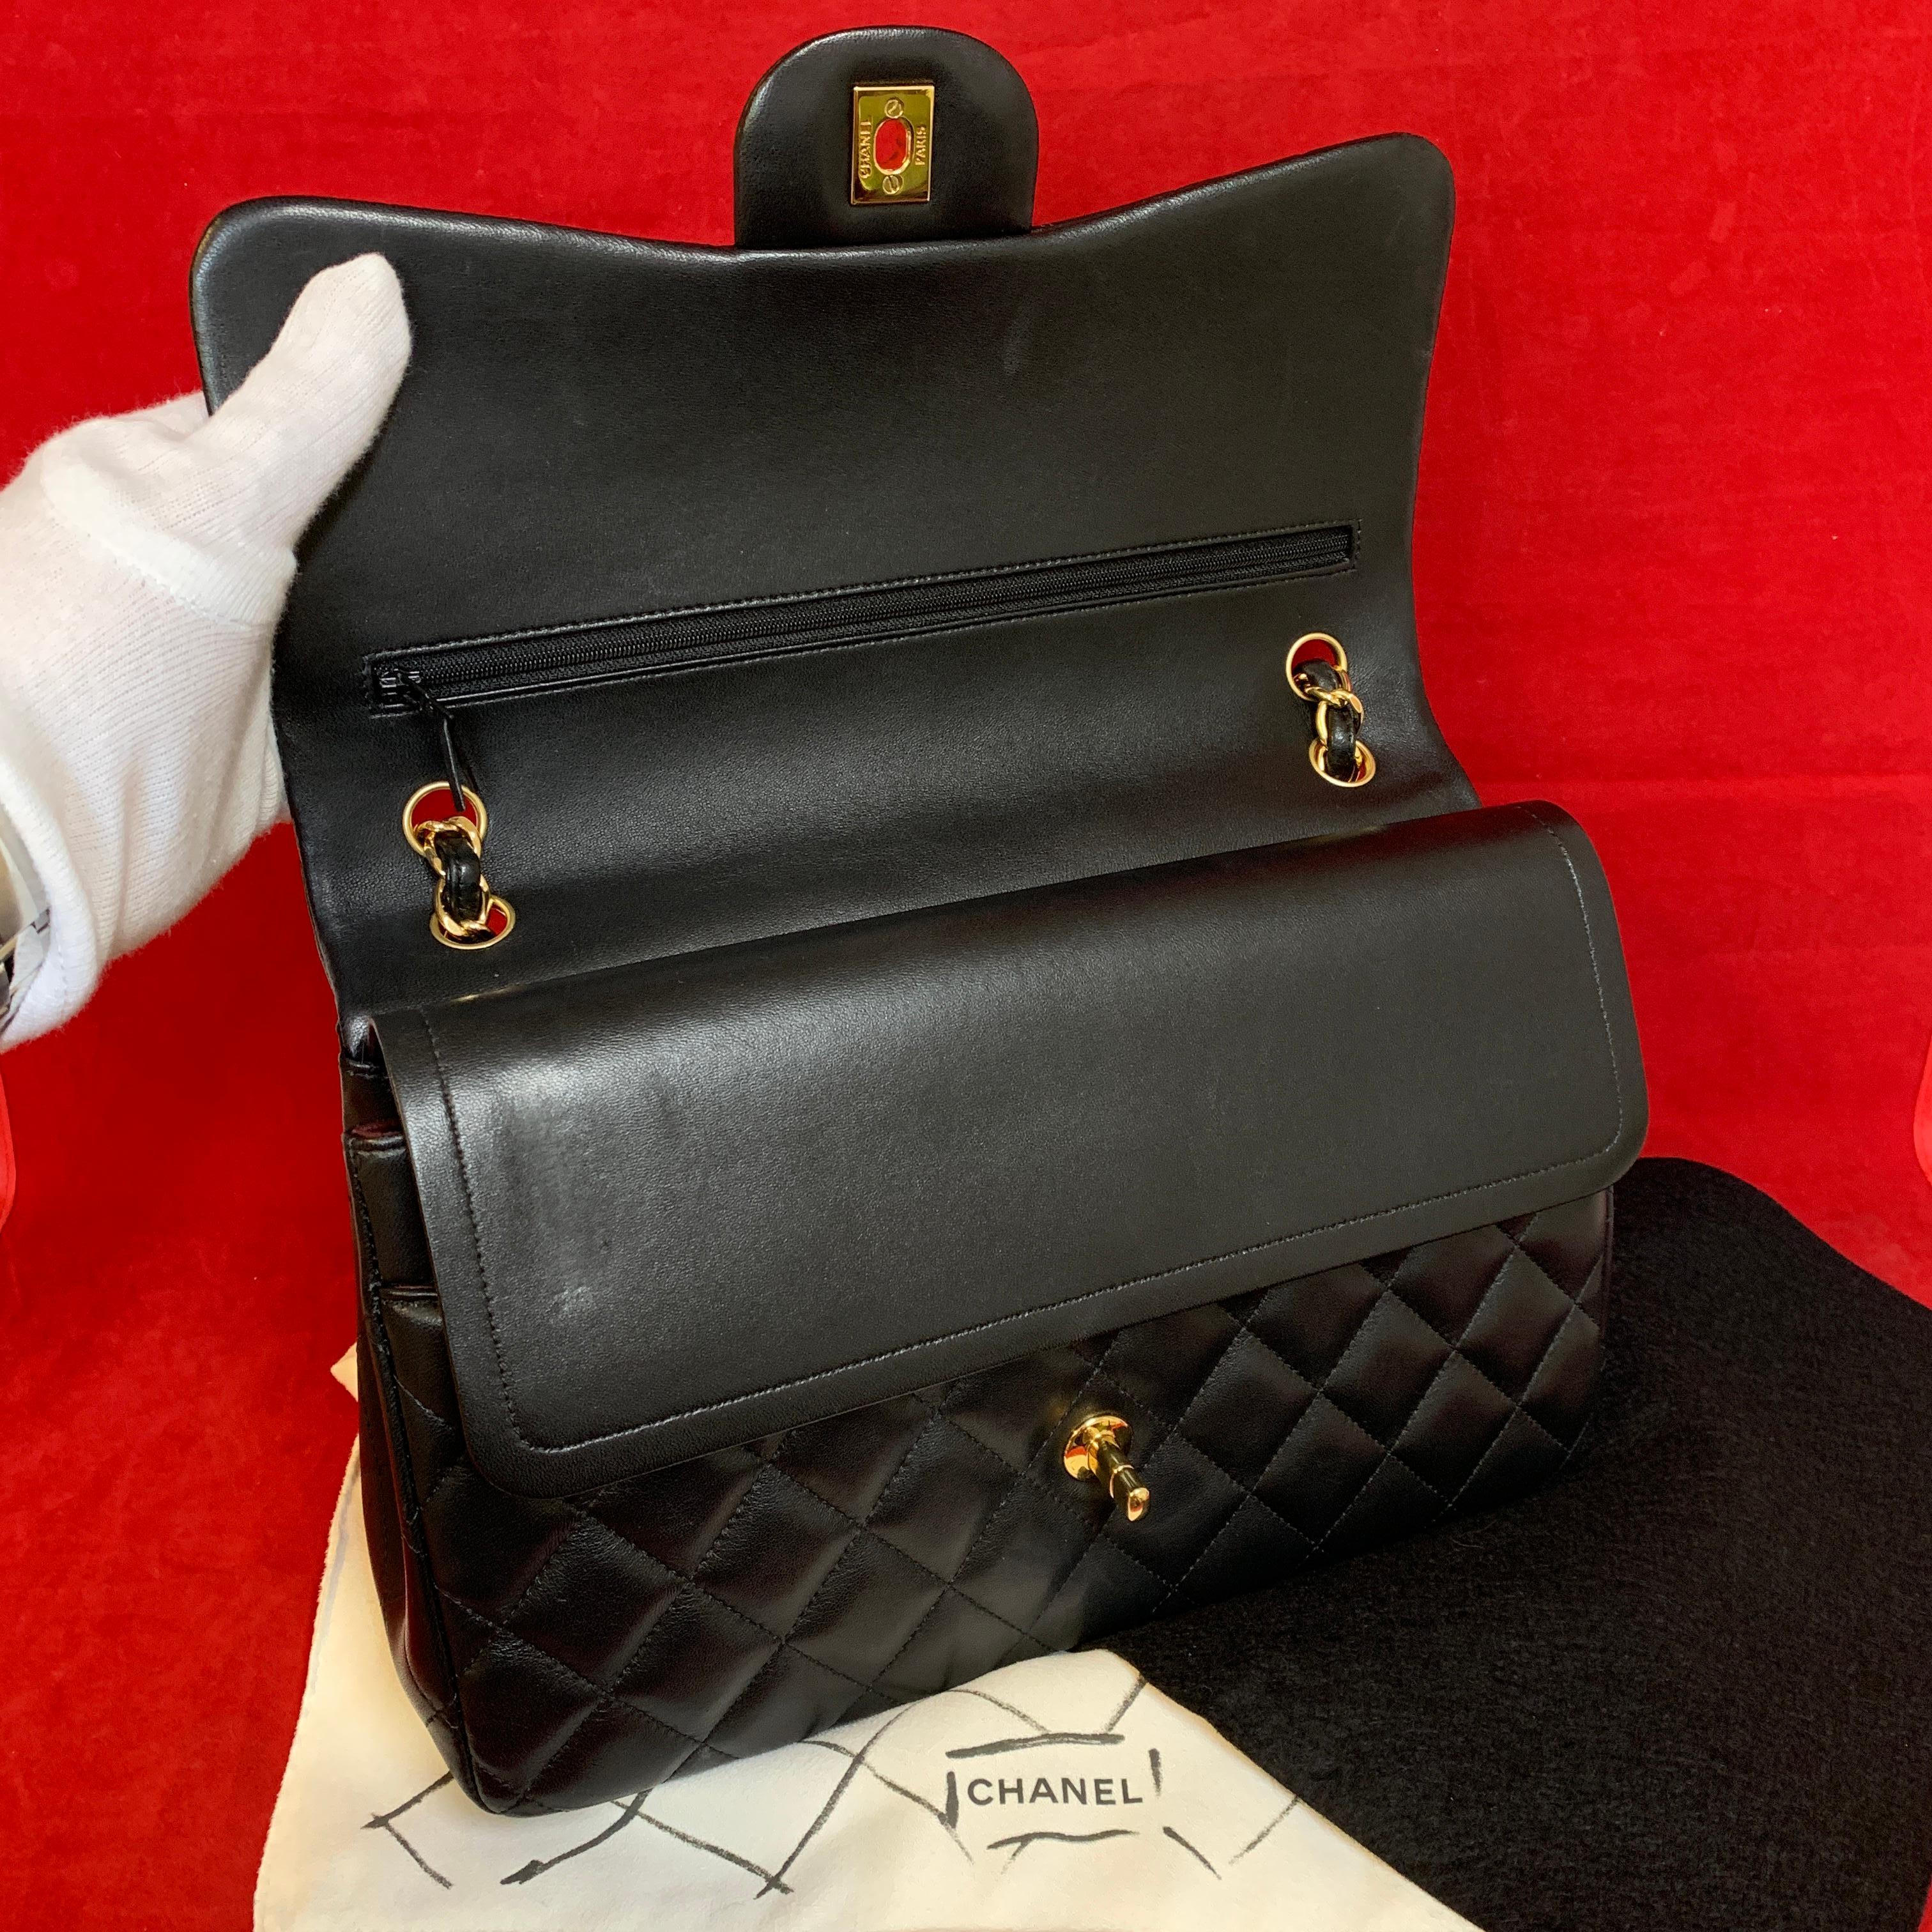 CHANEL A58600 classic double flap bag Jumbo shoulder bag quilted lambskin 2018 In Excellent Condition For Sale In Berlin, DE